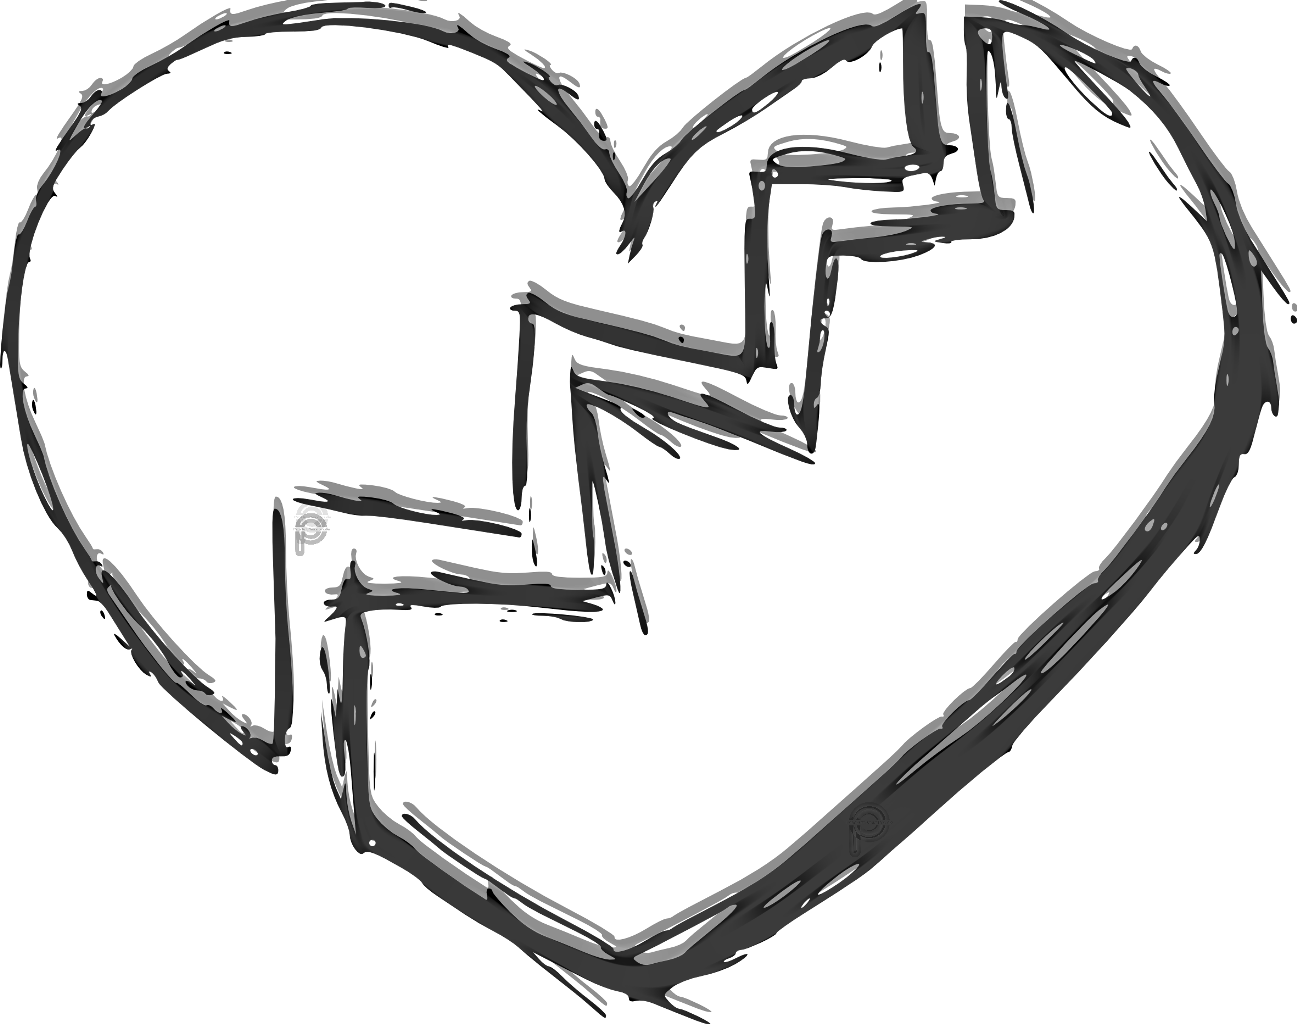 Hearts Drawings PNG Images HD